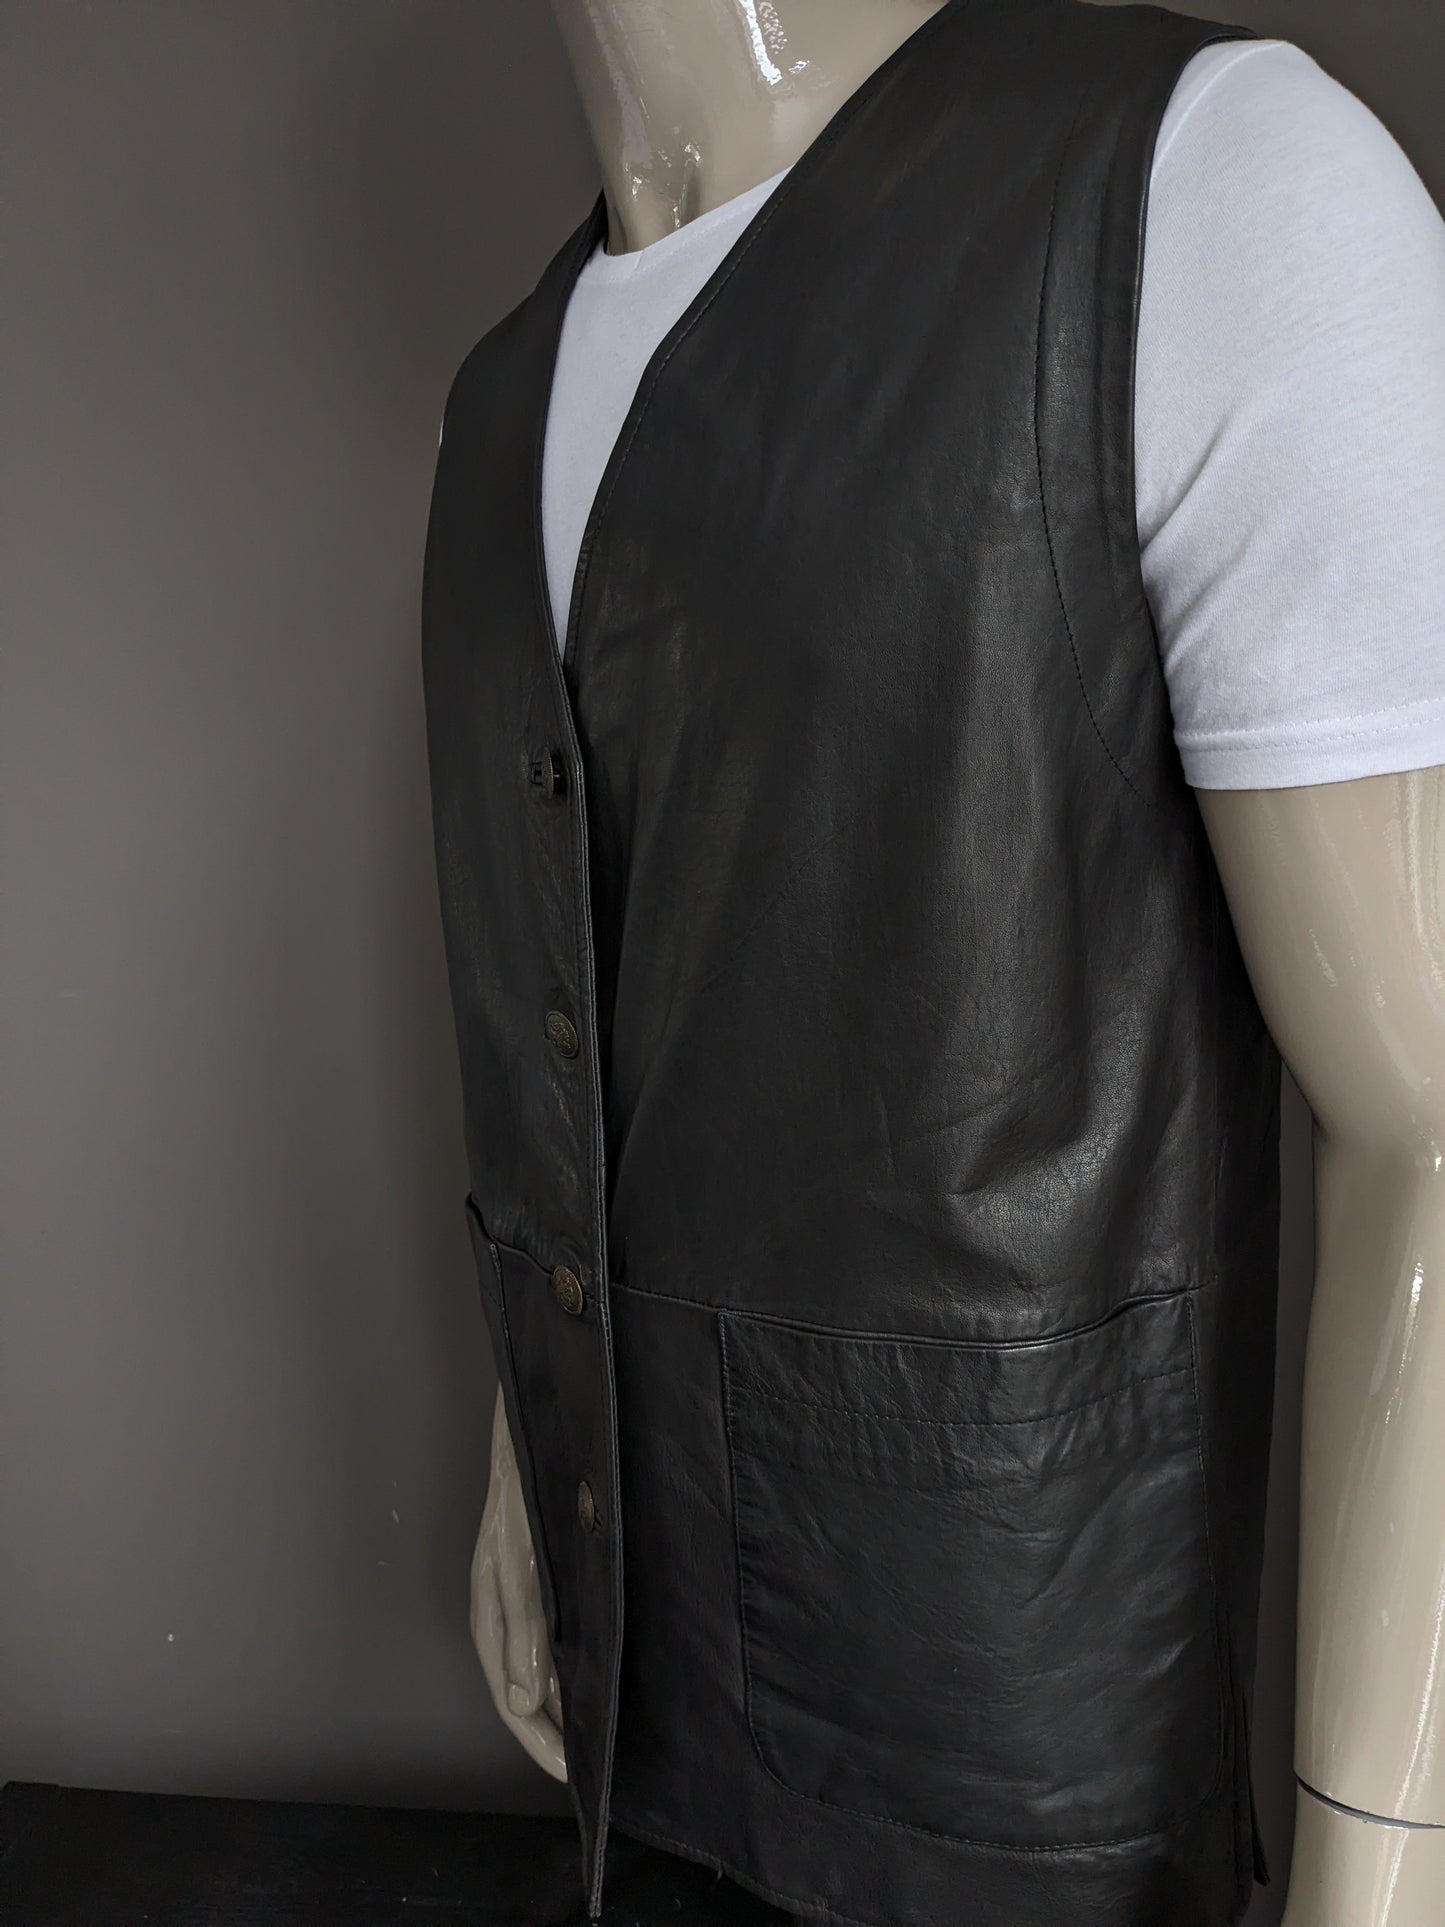 Medium length double -sided leather waistcoat with beautiful buttons. Dark brown. Size L.